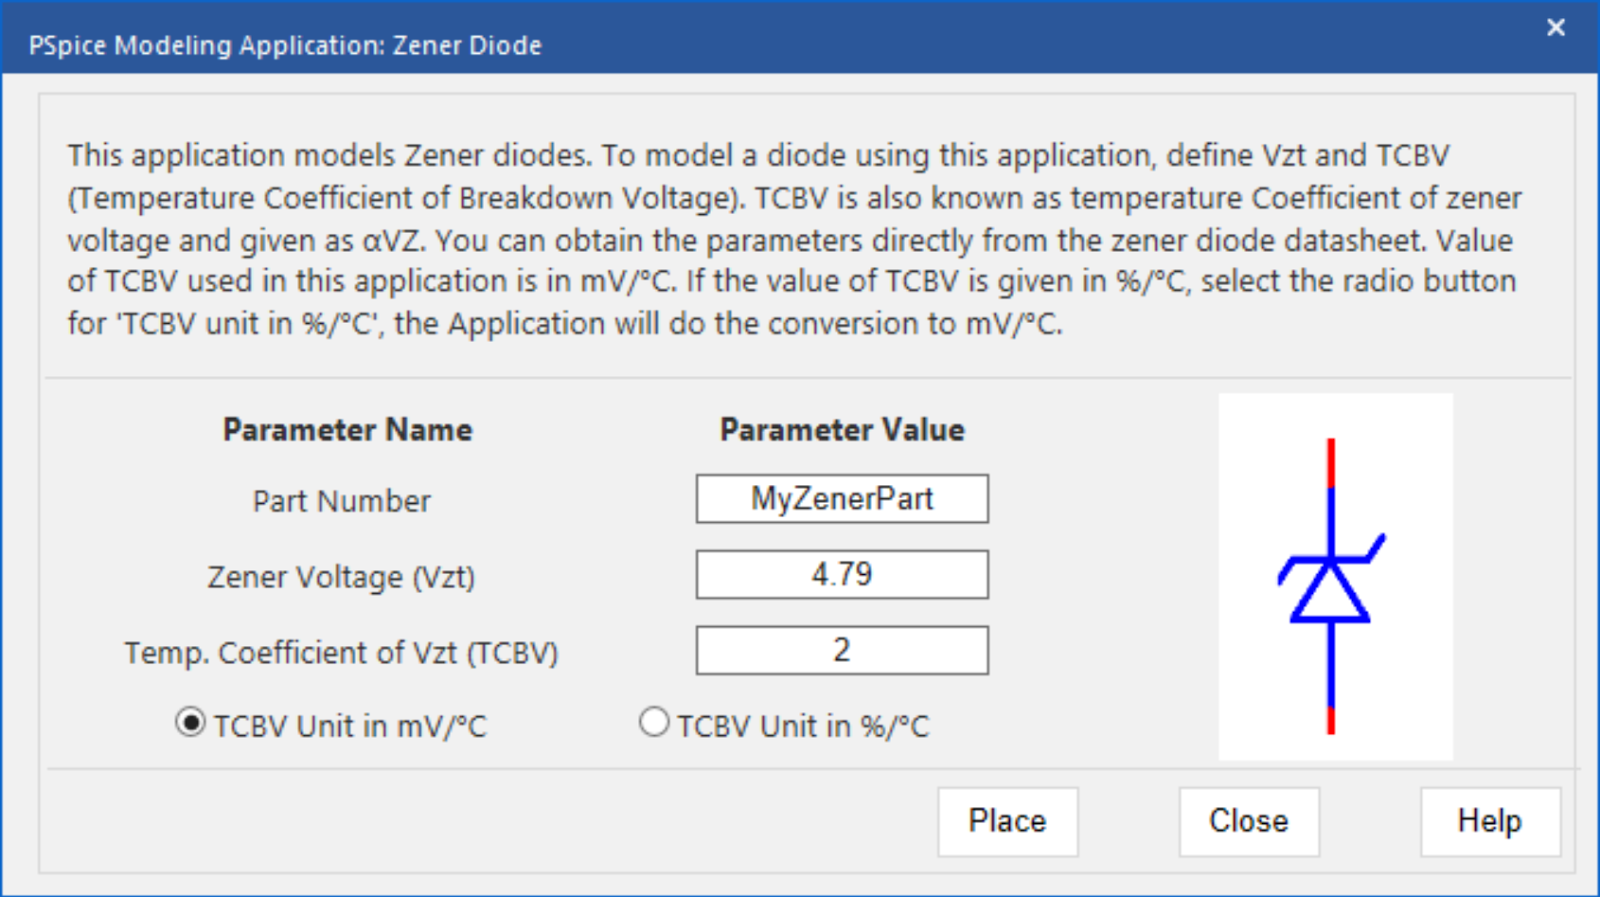 Create a Zener Diode SPICE Model with the PSpice Modeling Application